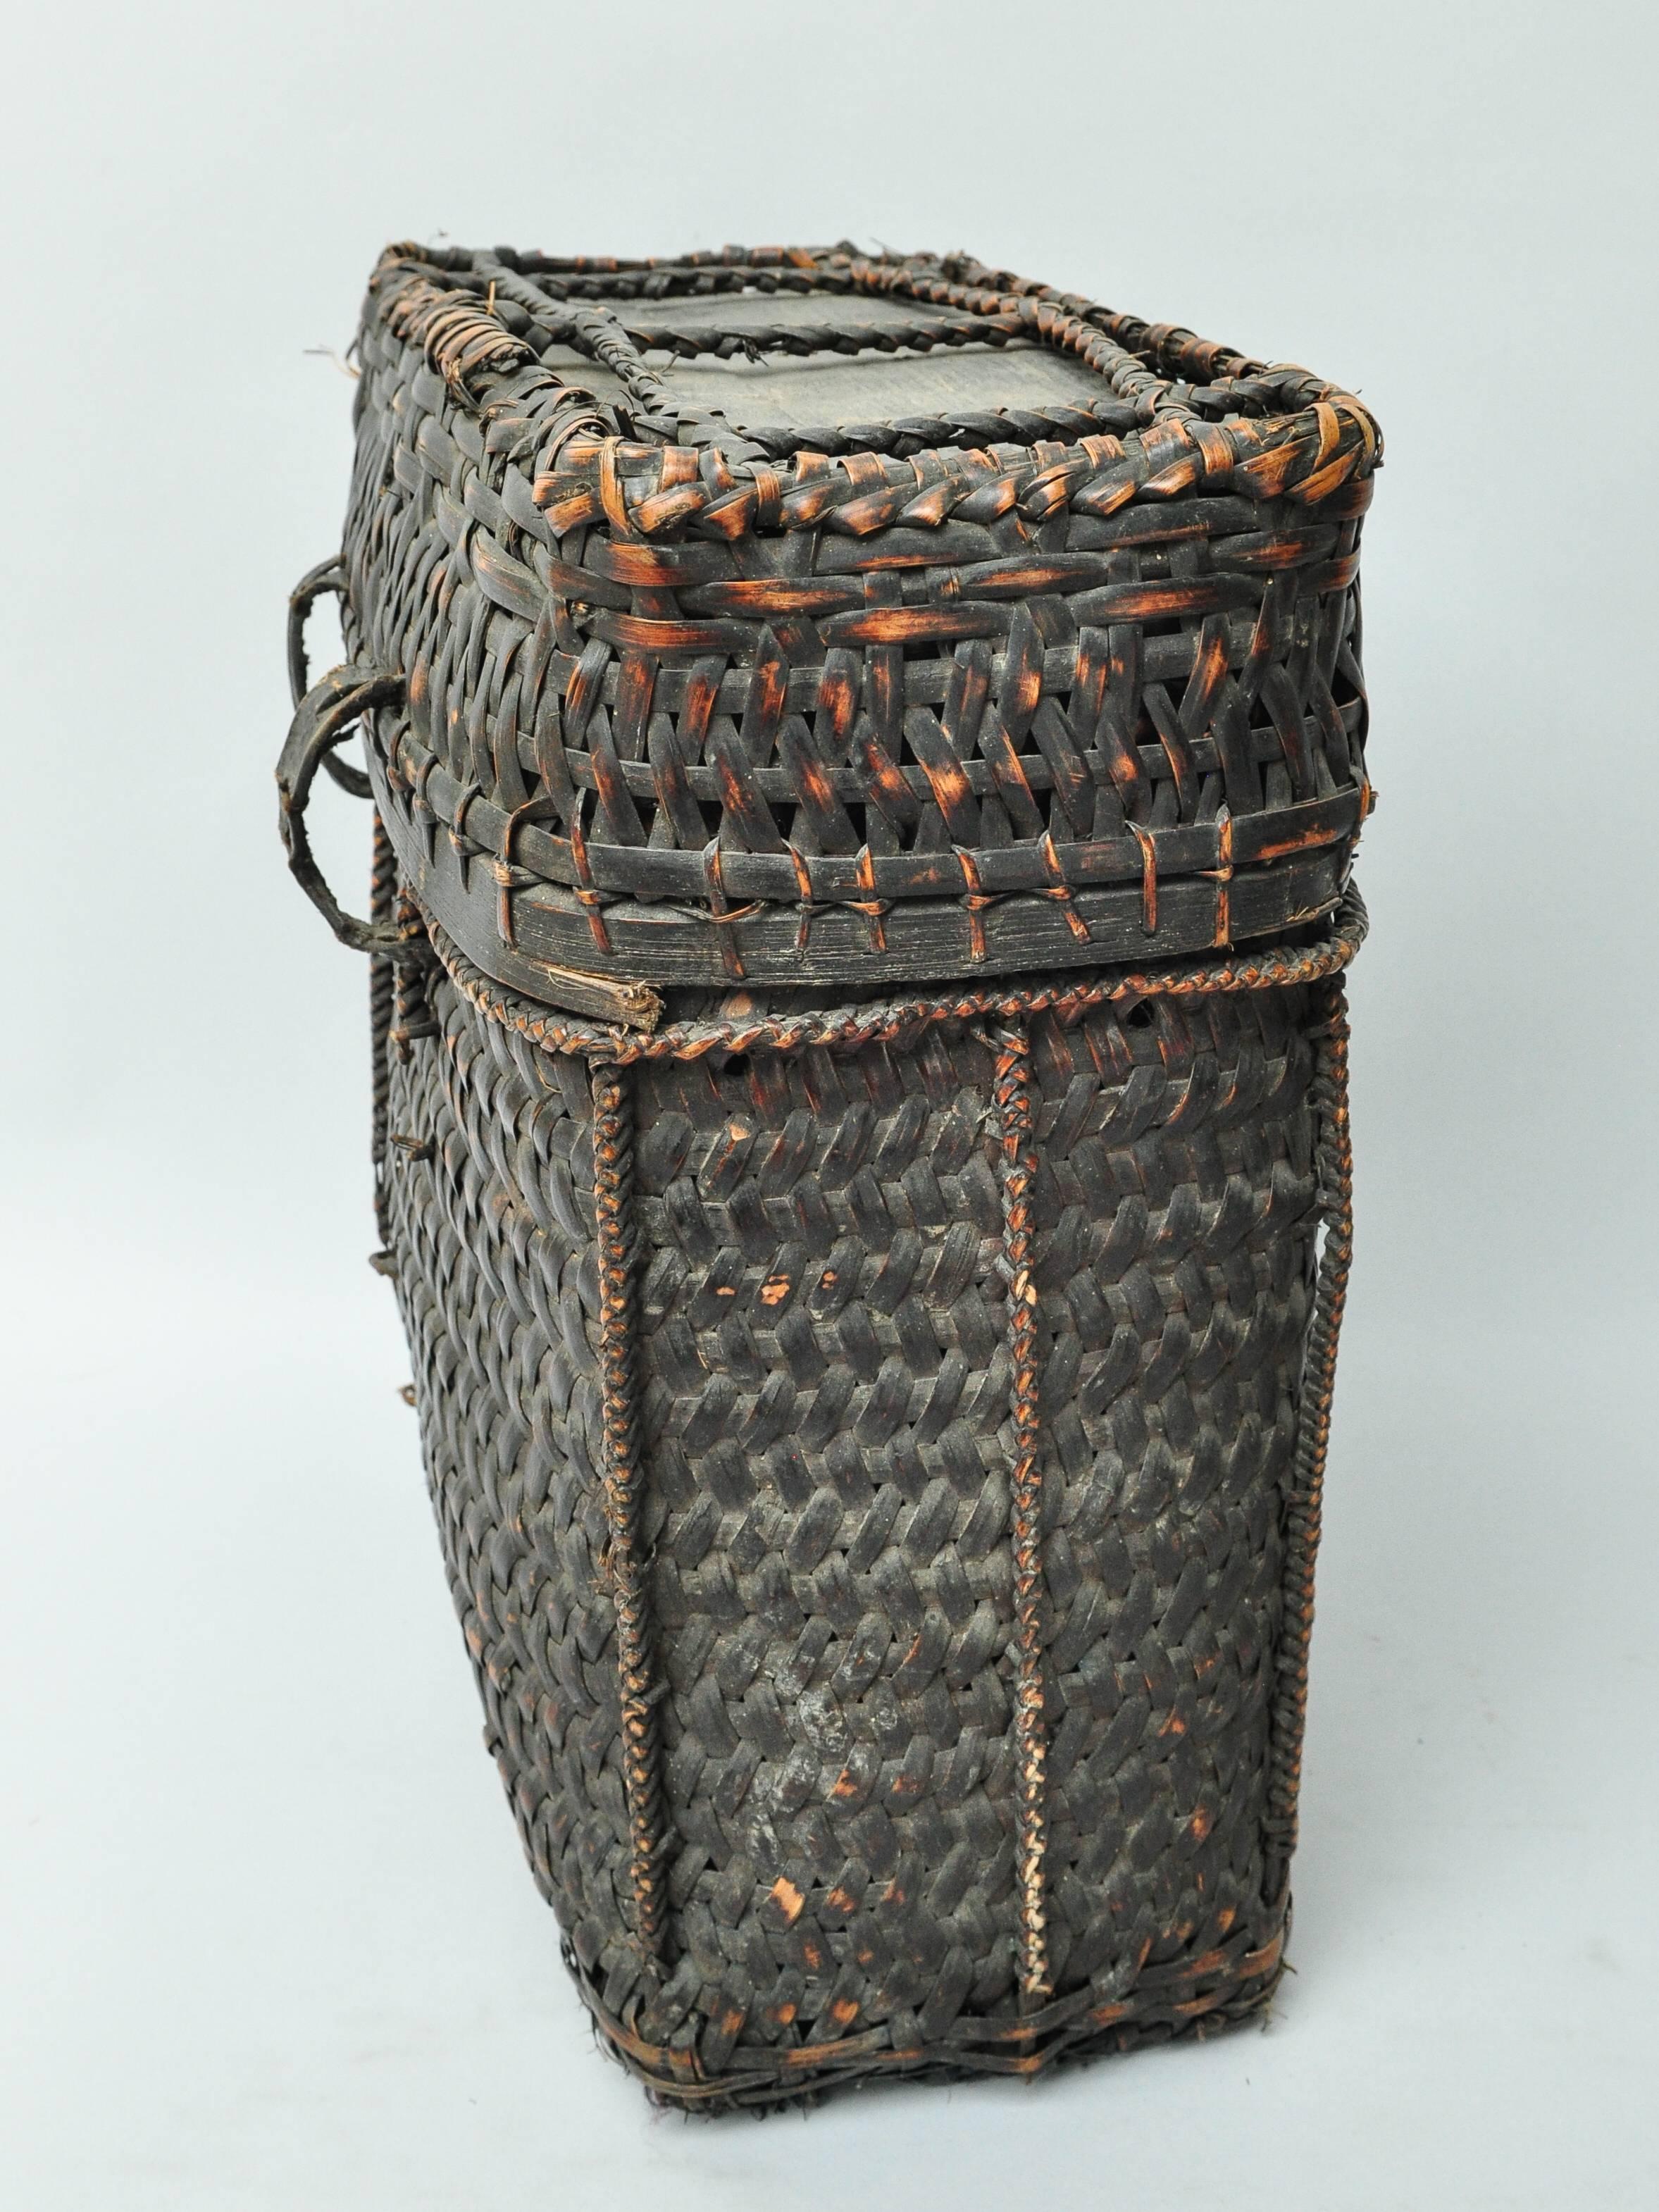 Bhutanese Tribal Storage and Carrying Basket with Lid from Bhutan, Mid-Late 20th Century